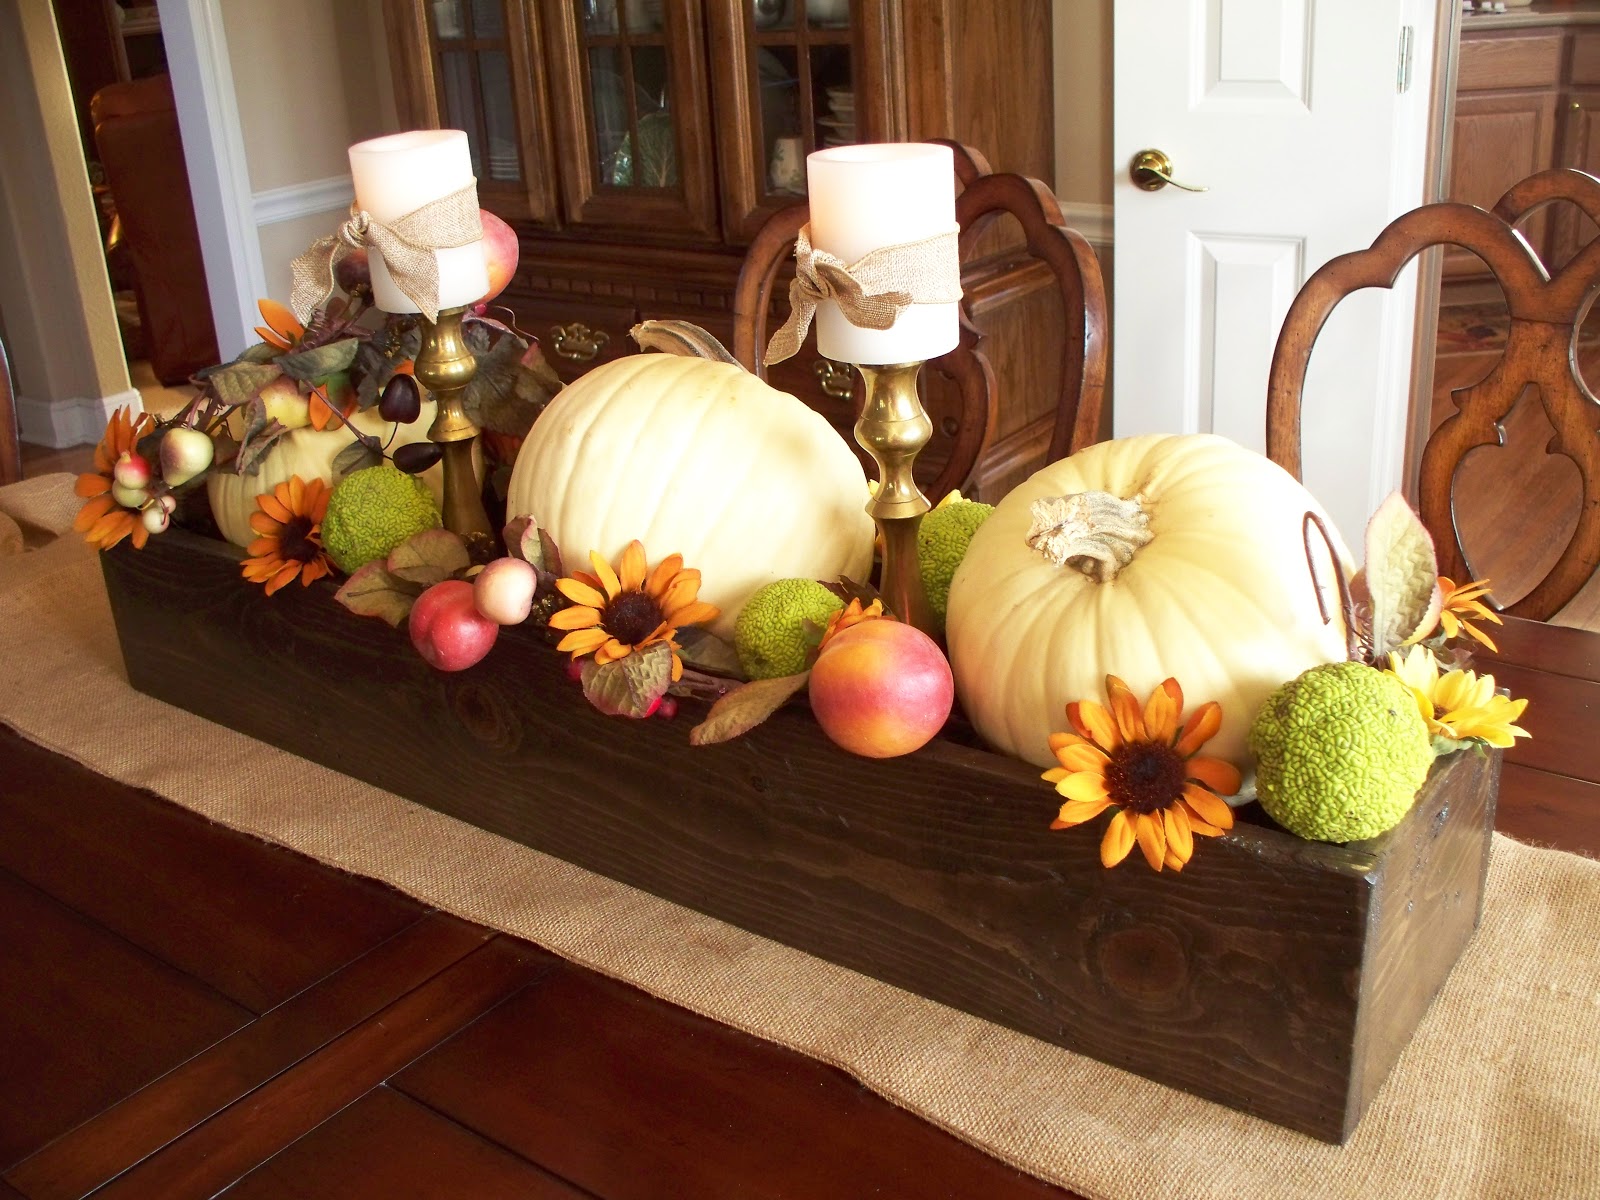 Carol's Heirloom Collection: Decorating With Hedge Apples